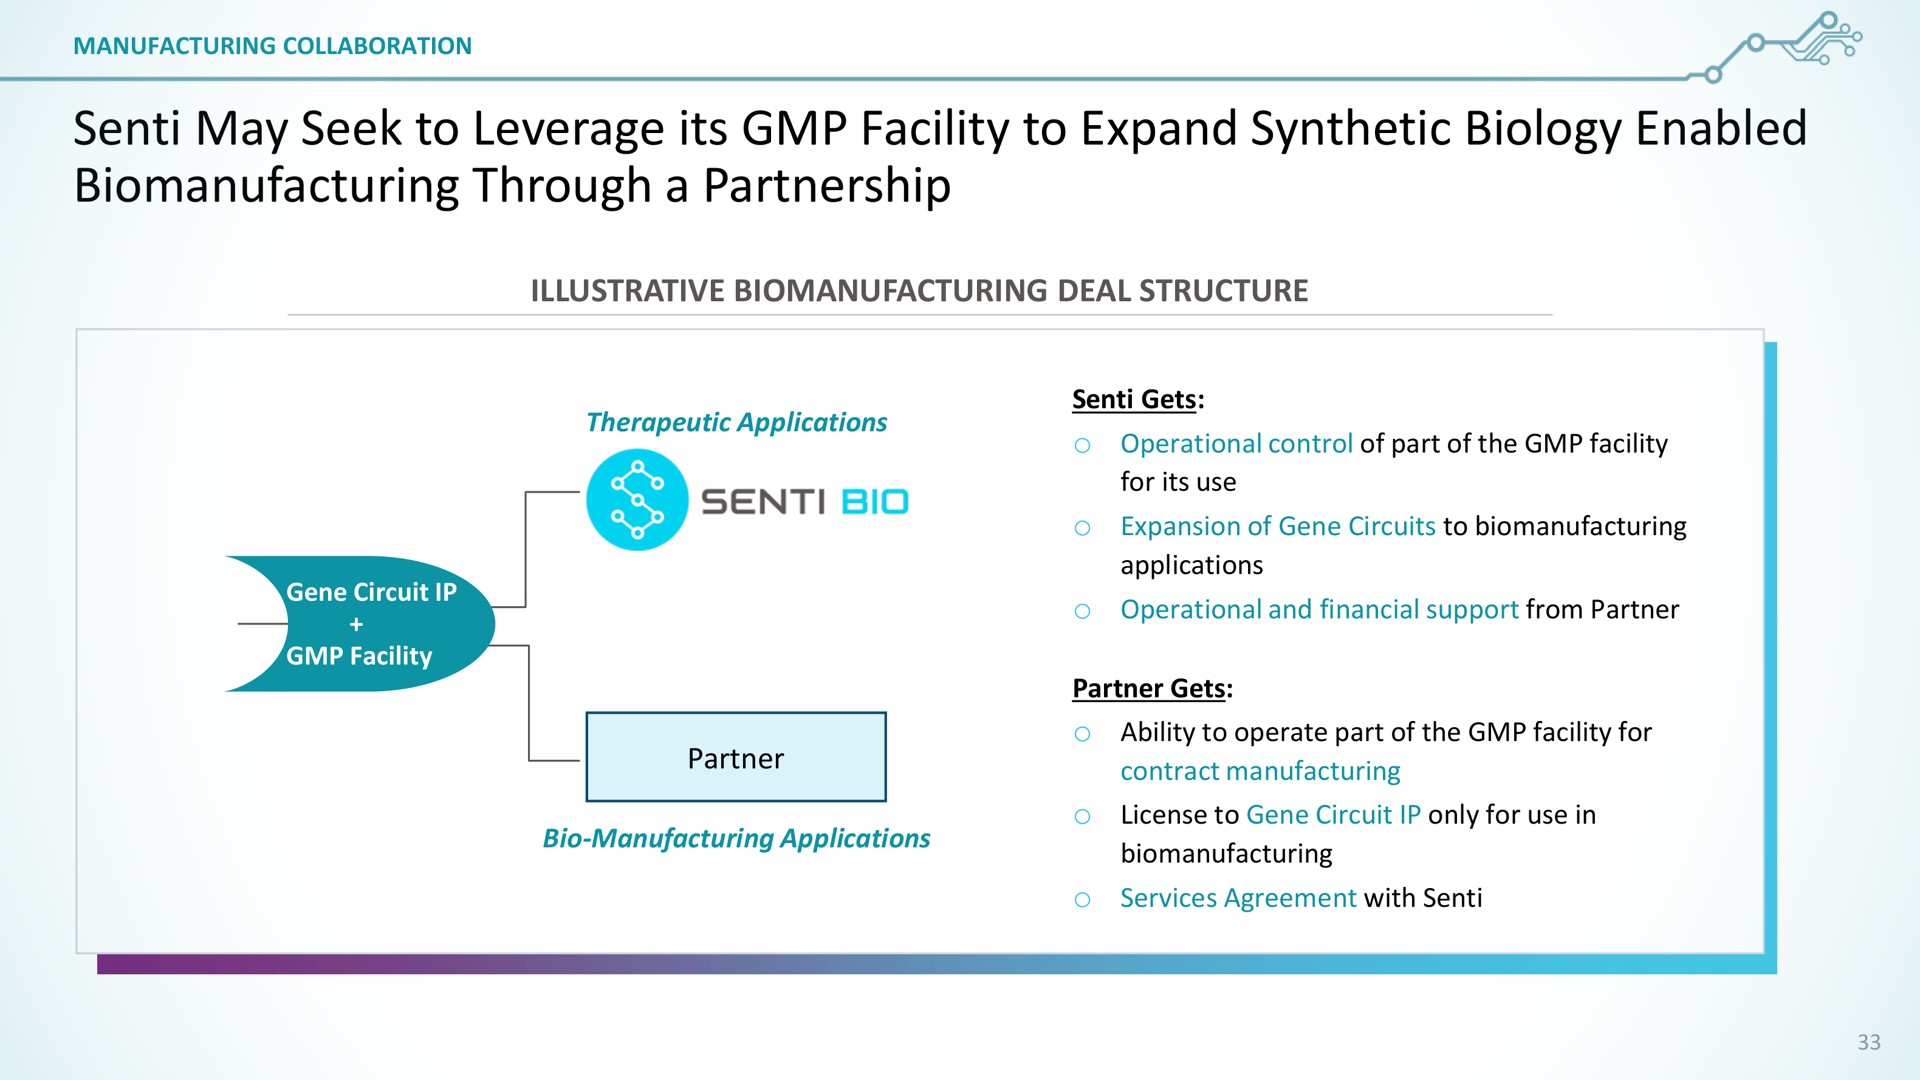 senti may seek to leverage its facility to expand synthetic biology enabled through a partnership | SentiBio